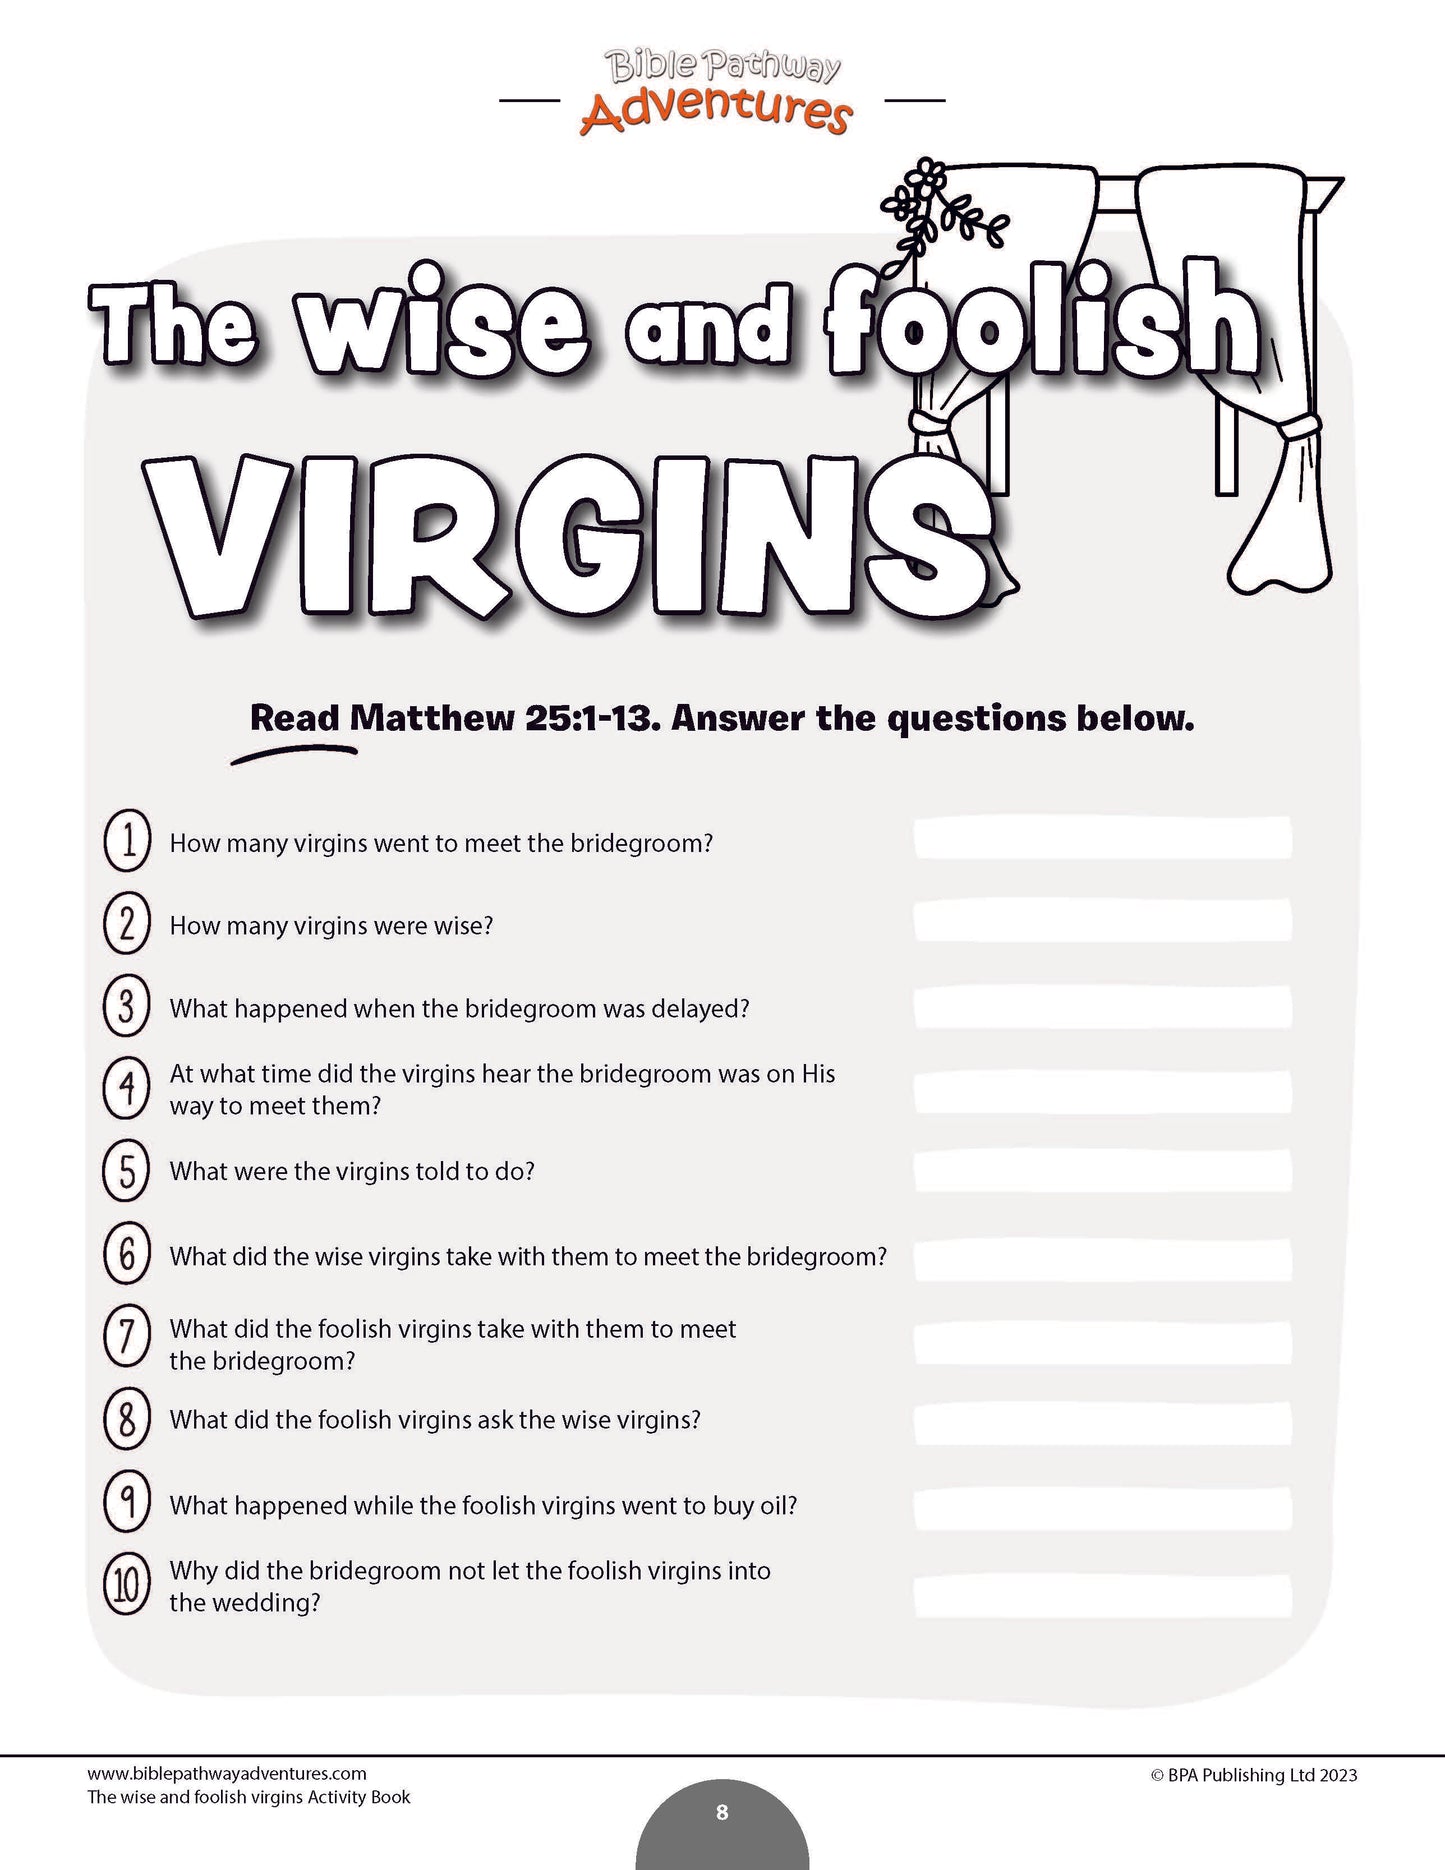 Parable of the Wise and Foolish Virgins Activity Book